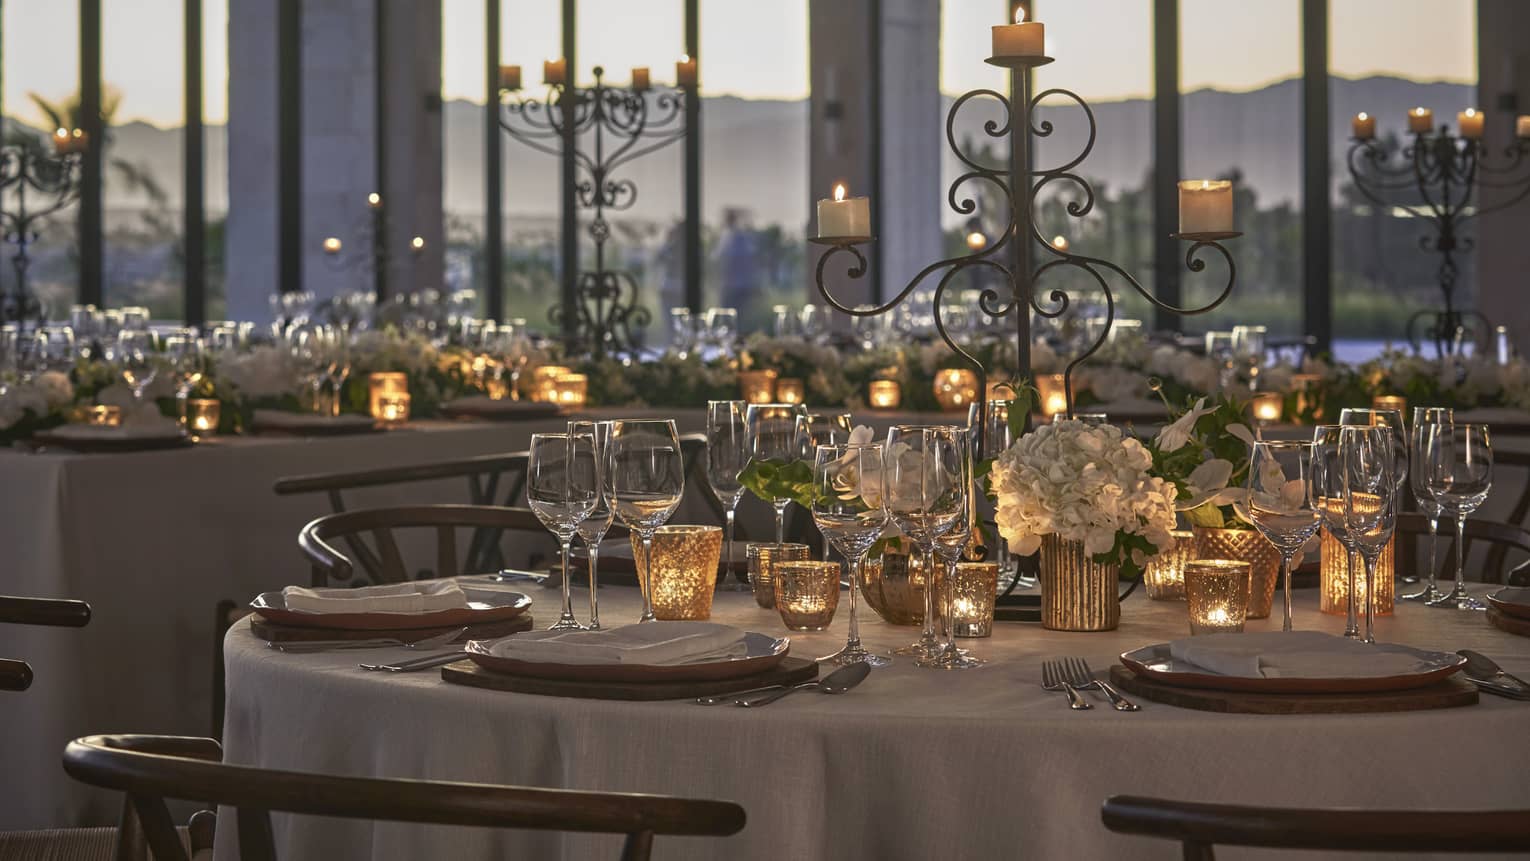 Floor to ceiling paneled windows let in the evening light into the glamorous ballroom, decorated with candles, white floral arrangements and crystal dinnerware.  